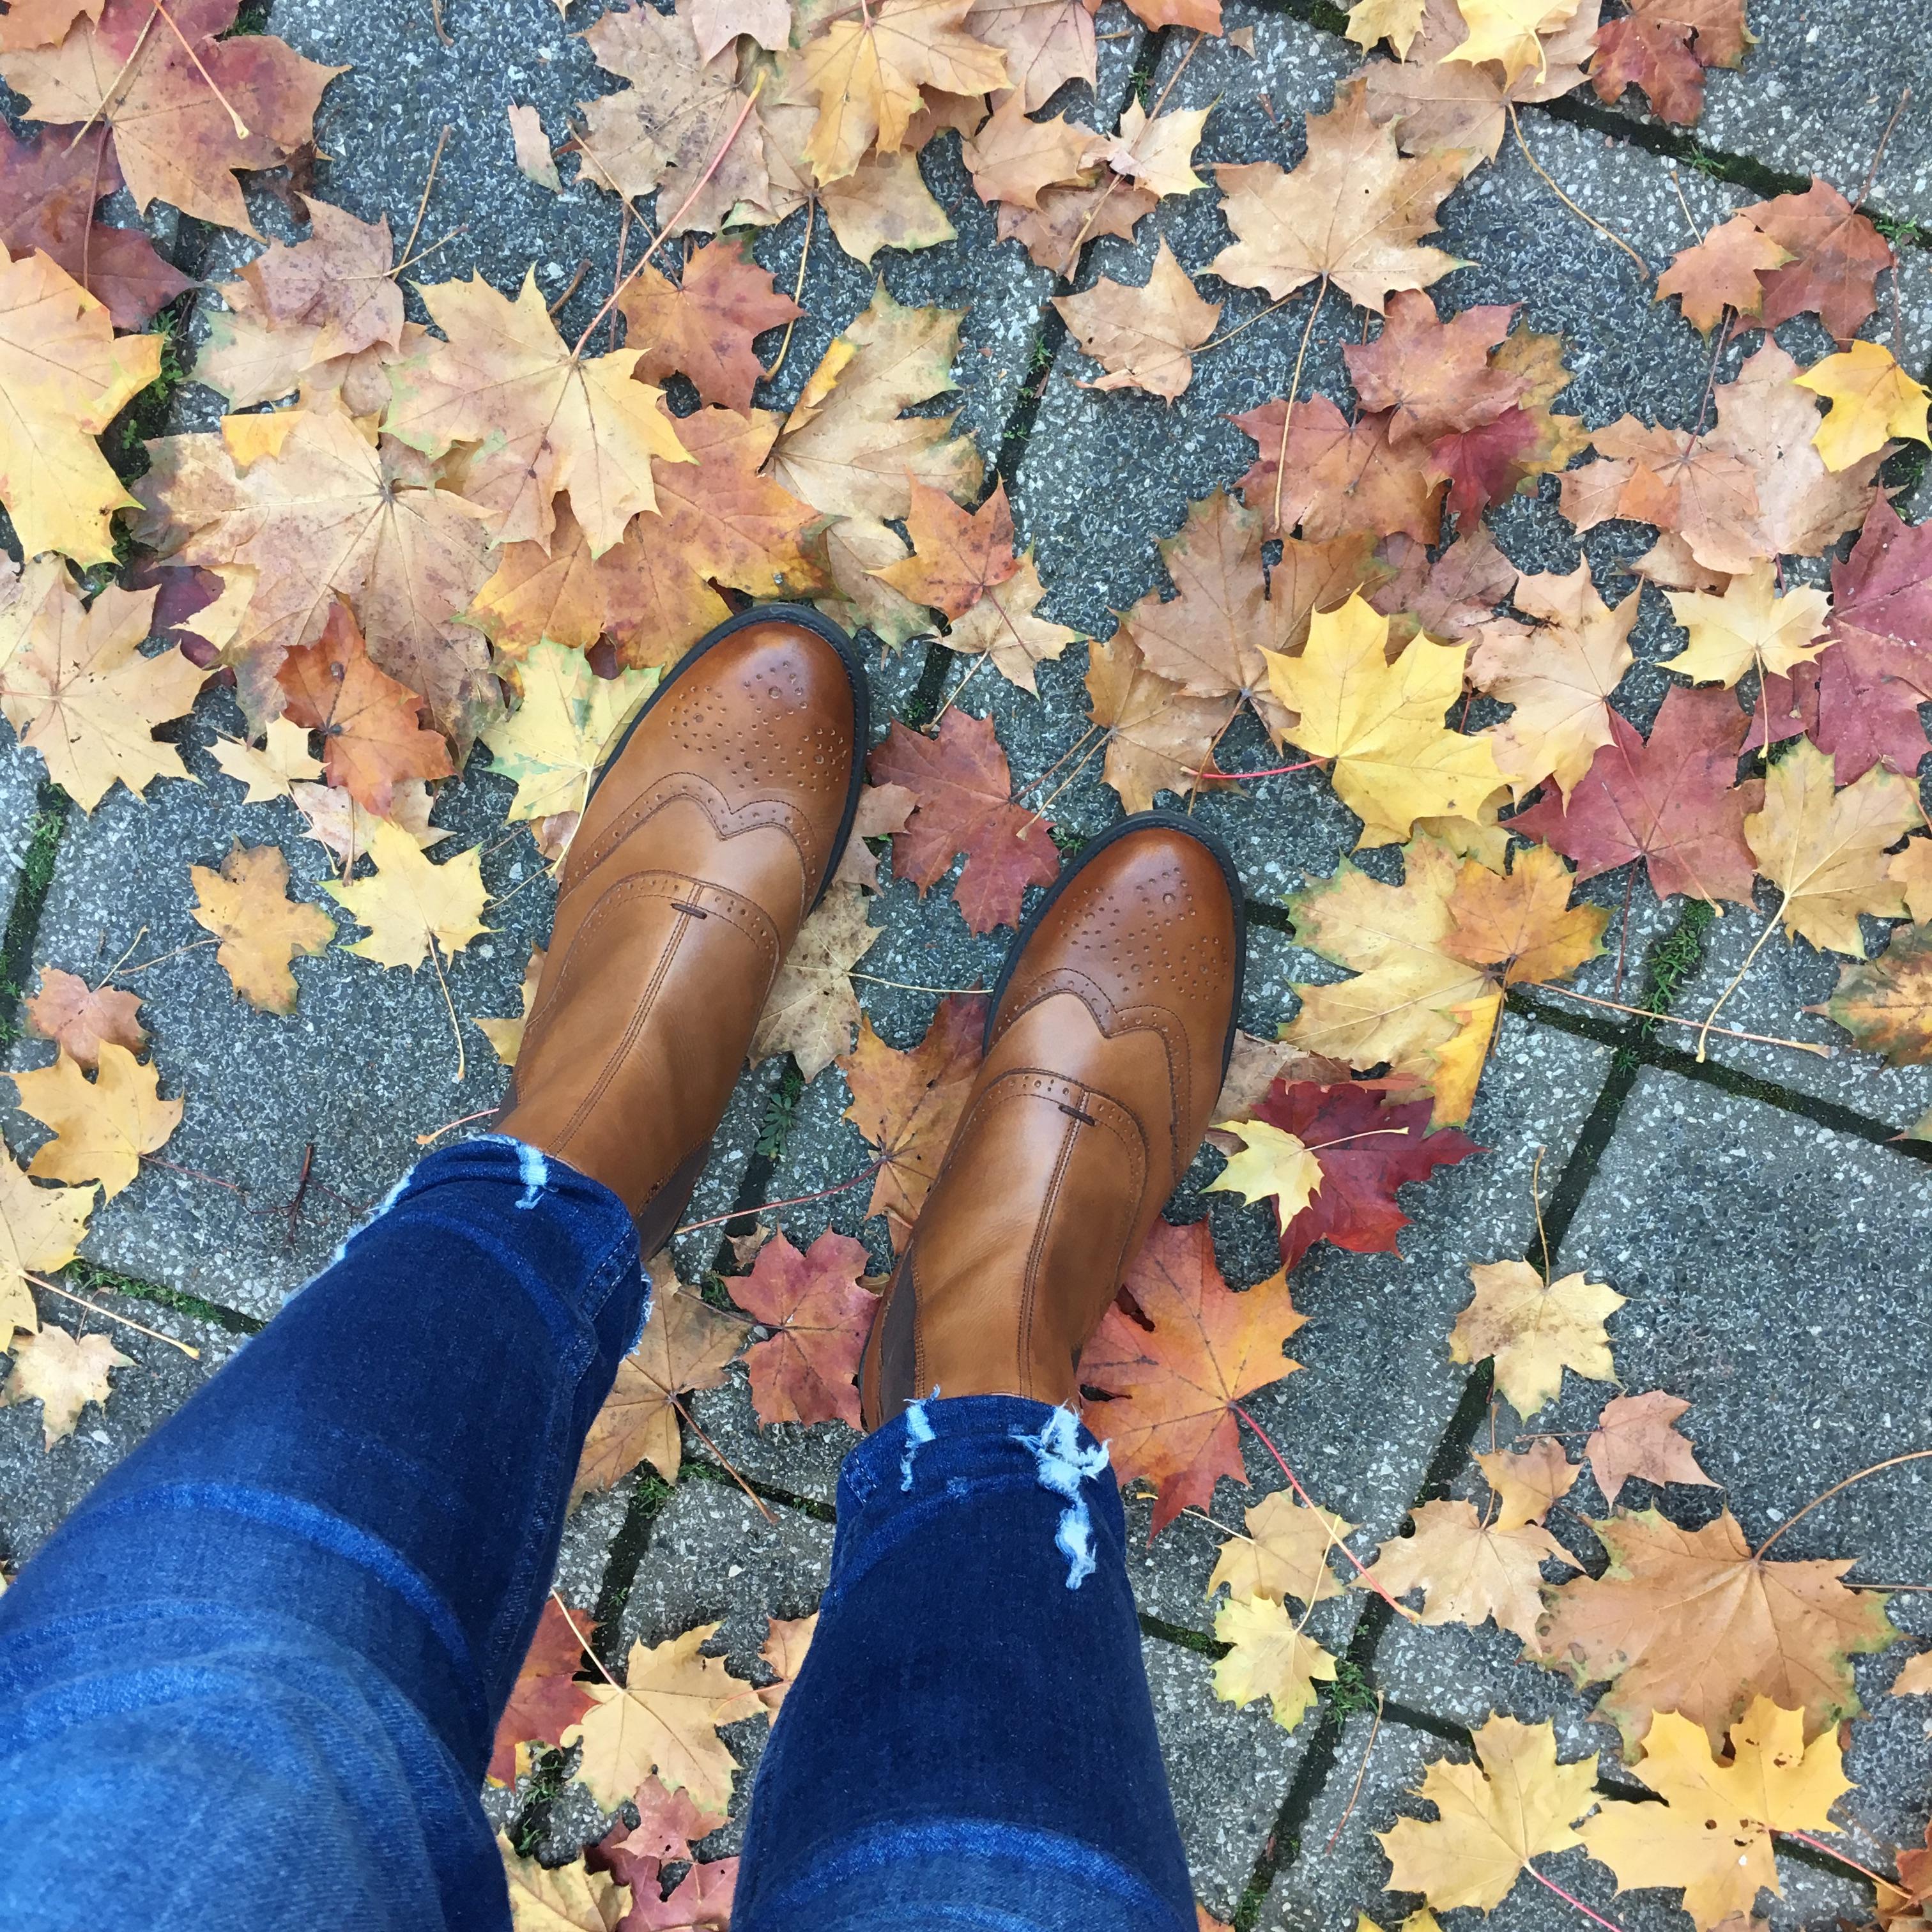 New boots❤️
#boots #autumn #fashion #bluejeans